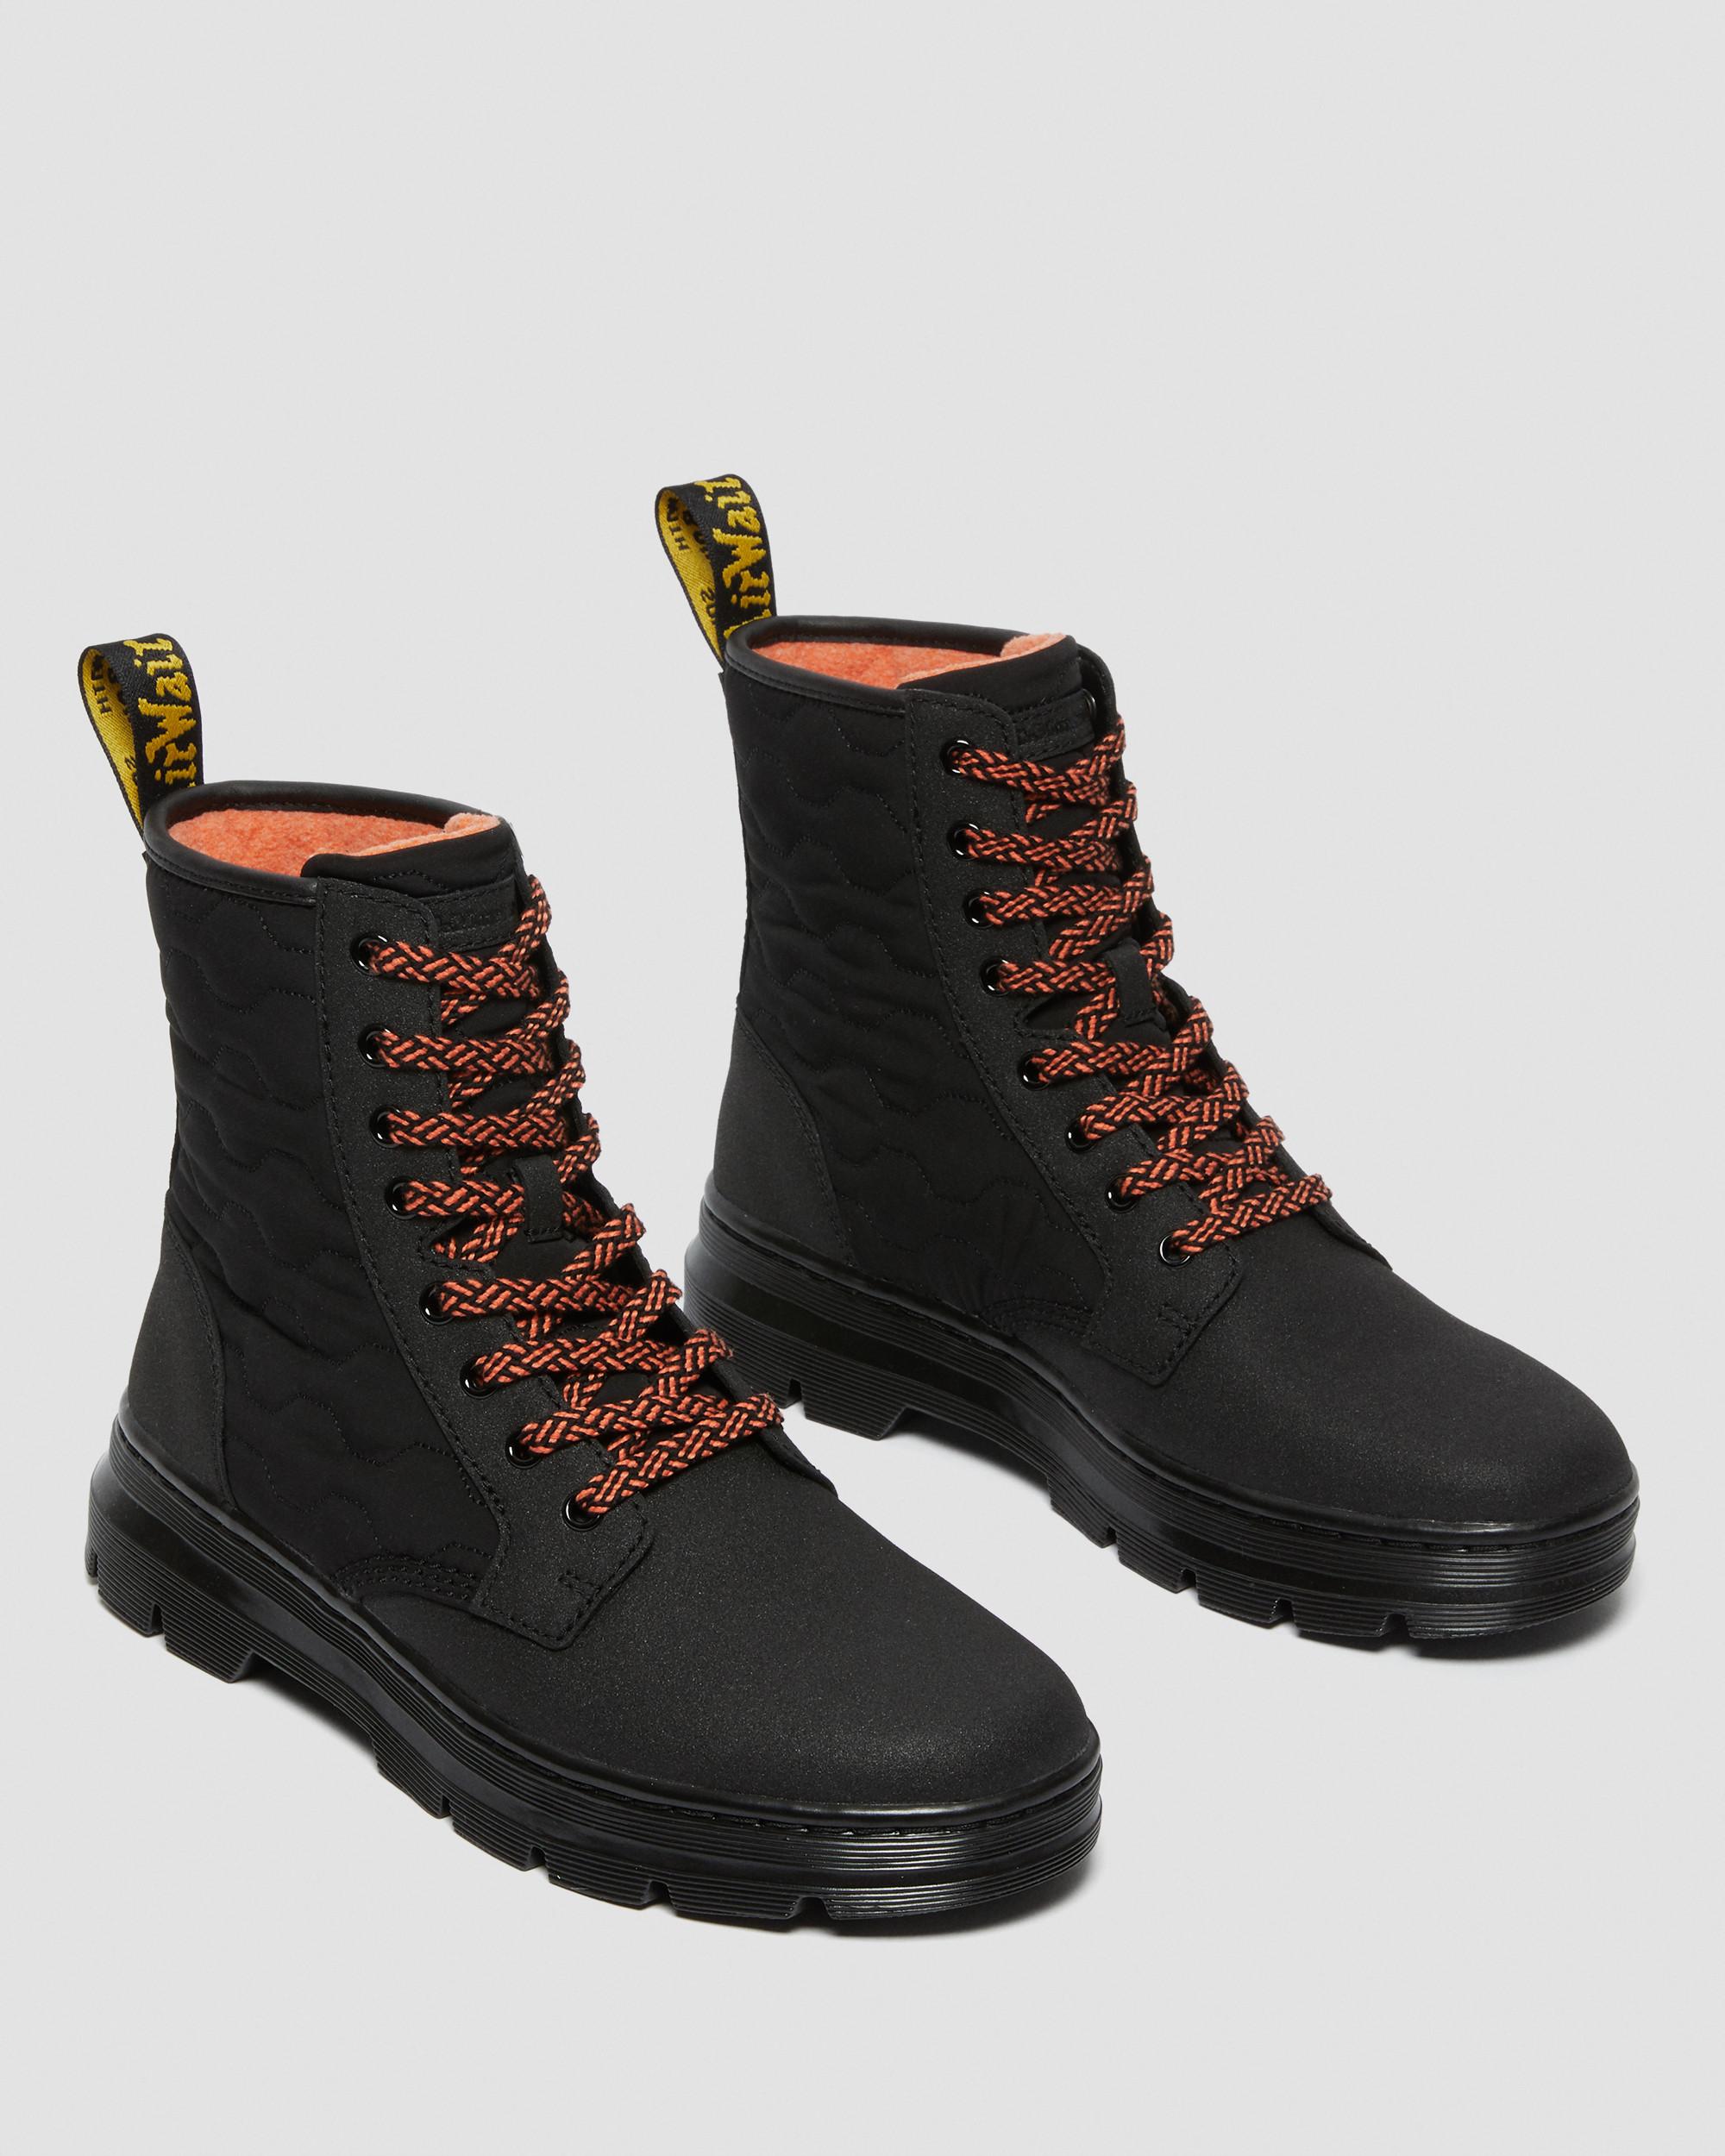 Dr. Martens Combs II Dual Leather Lined Boots Black / Coral Men's 12